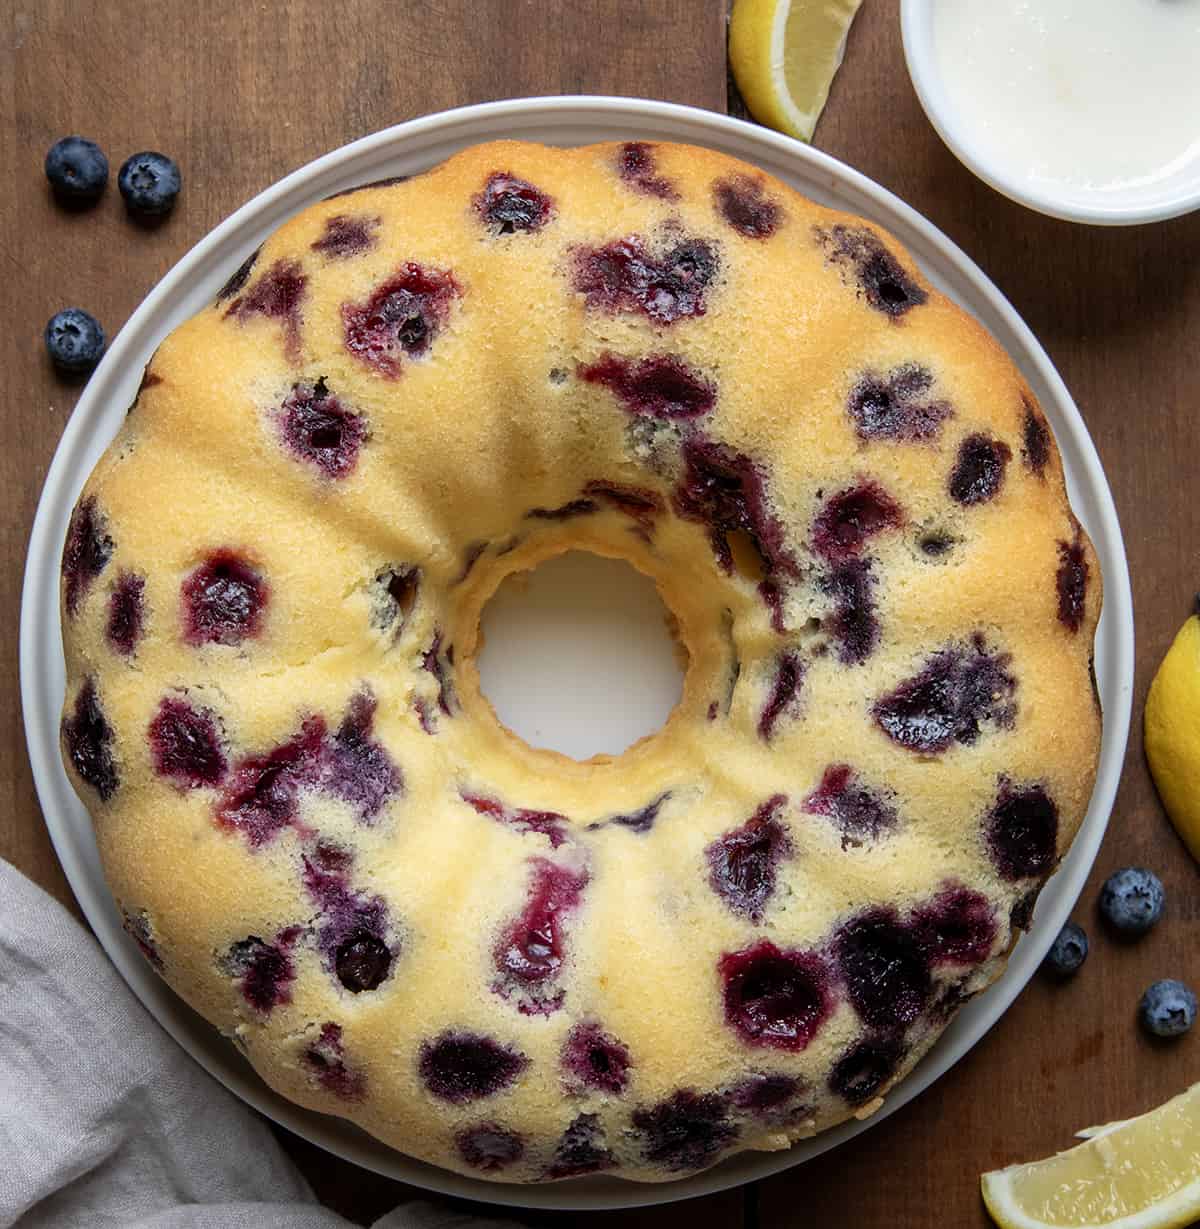 Lemon Blueberry Pound Cake on a cake plate before glazing, with a bowl of glaze off to the side.